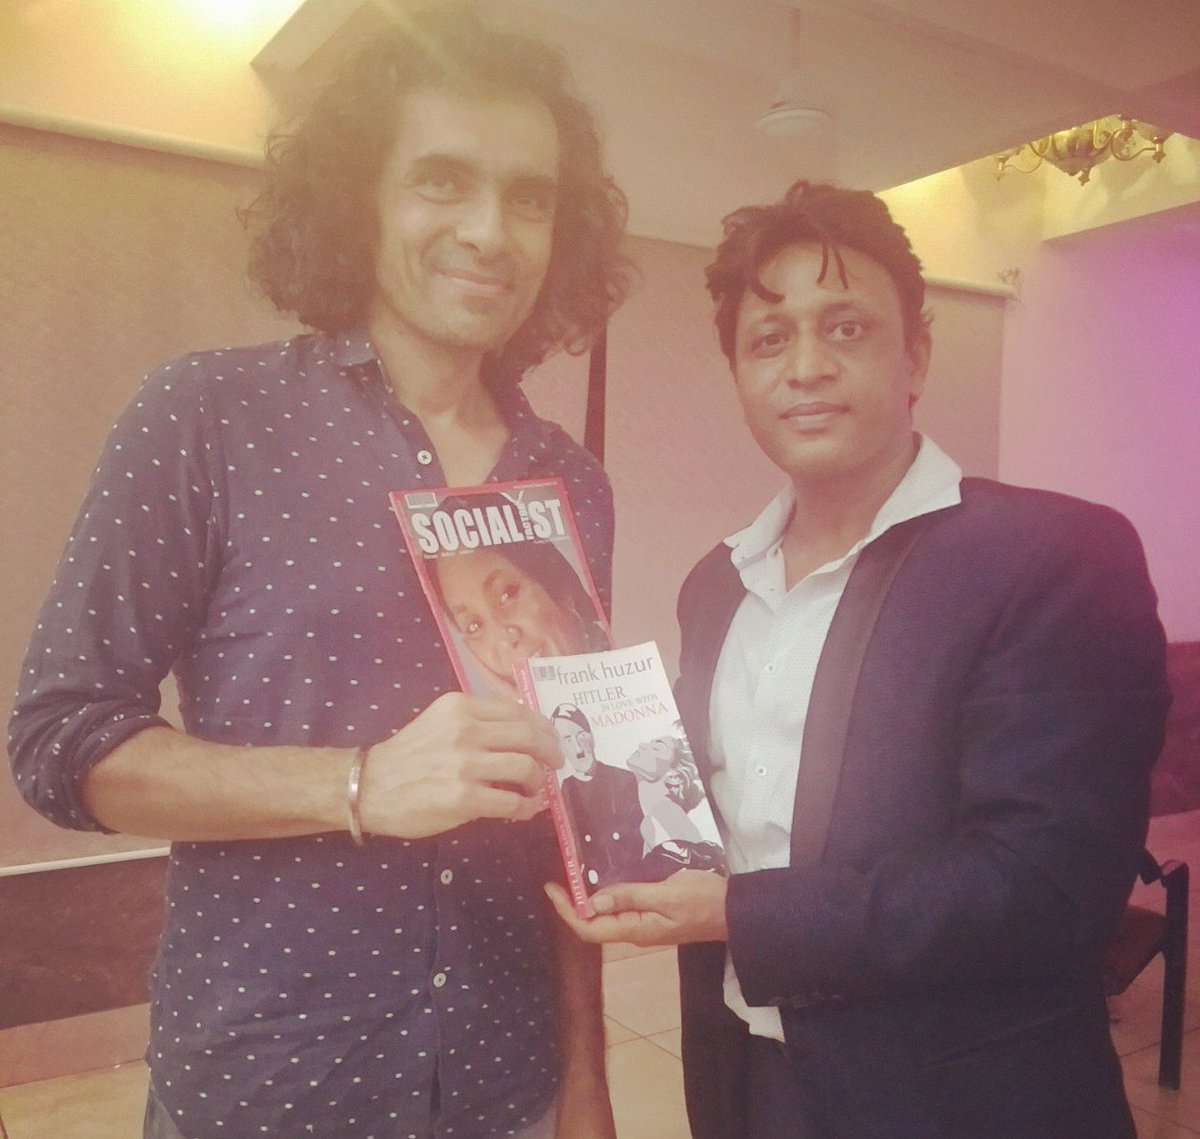 Guess who is with us smiling?  Hindu College Delhi University alumni get together last night and we have had pleasantly surprised visitor in a senior and a renowned filmmaker @ImtiazAliFC 
Presented a copy of Hitler in Love with Madonna & @socialistfactor August issue to the Ace